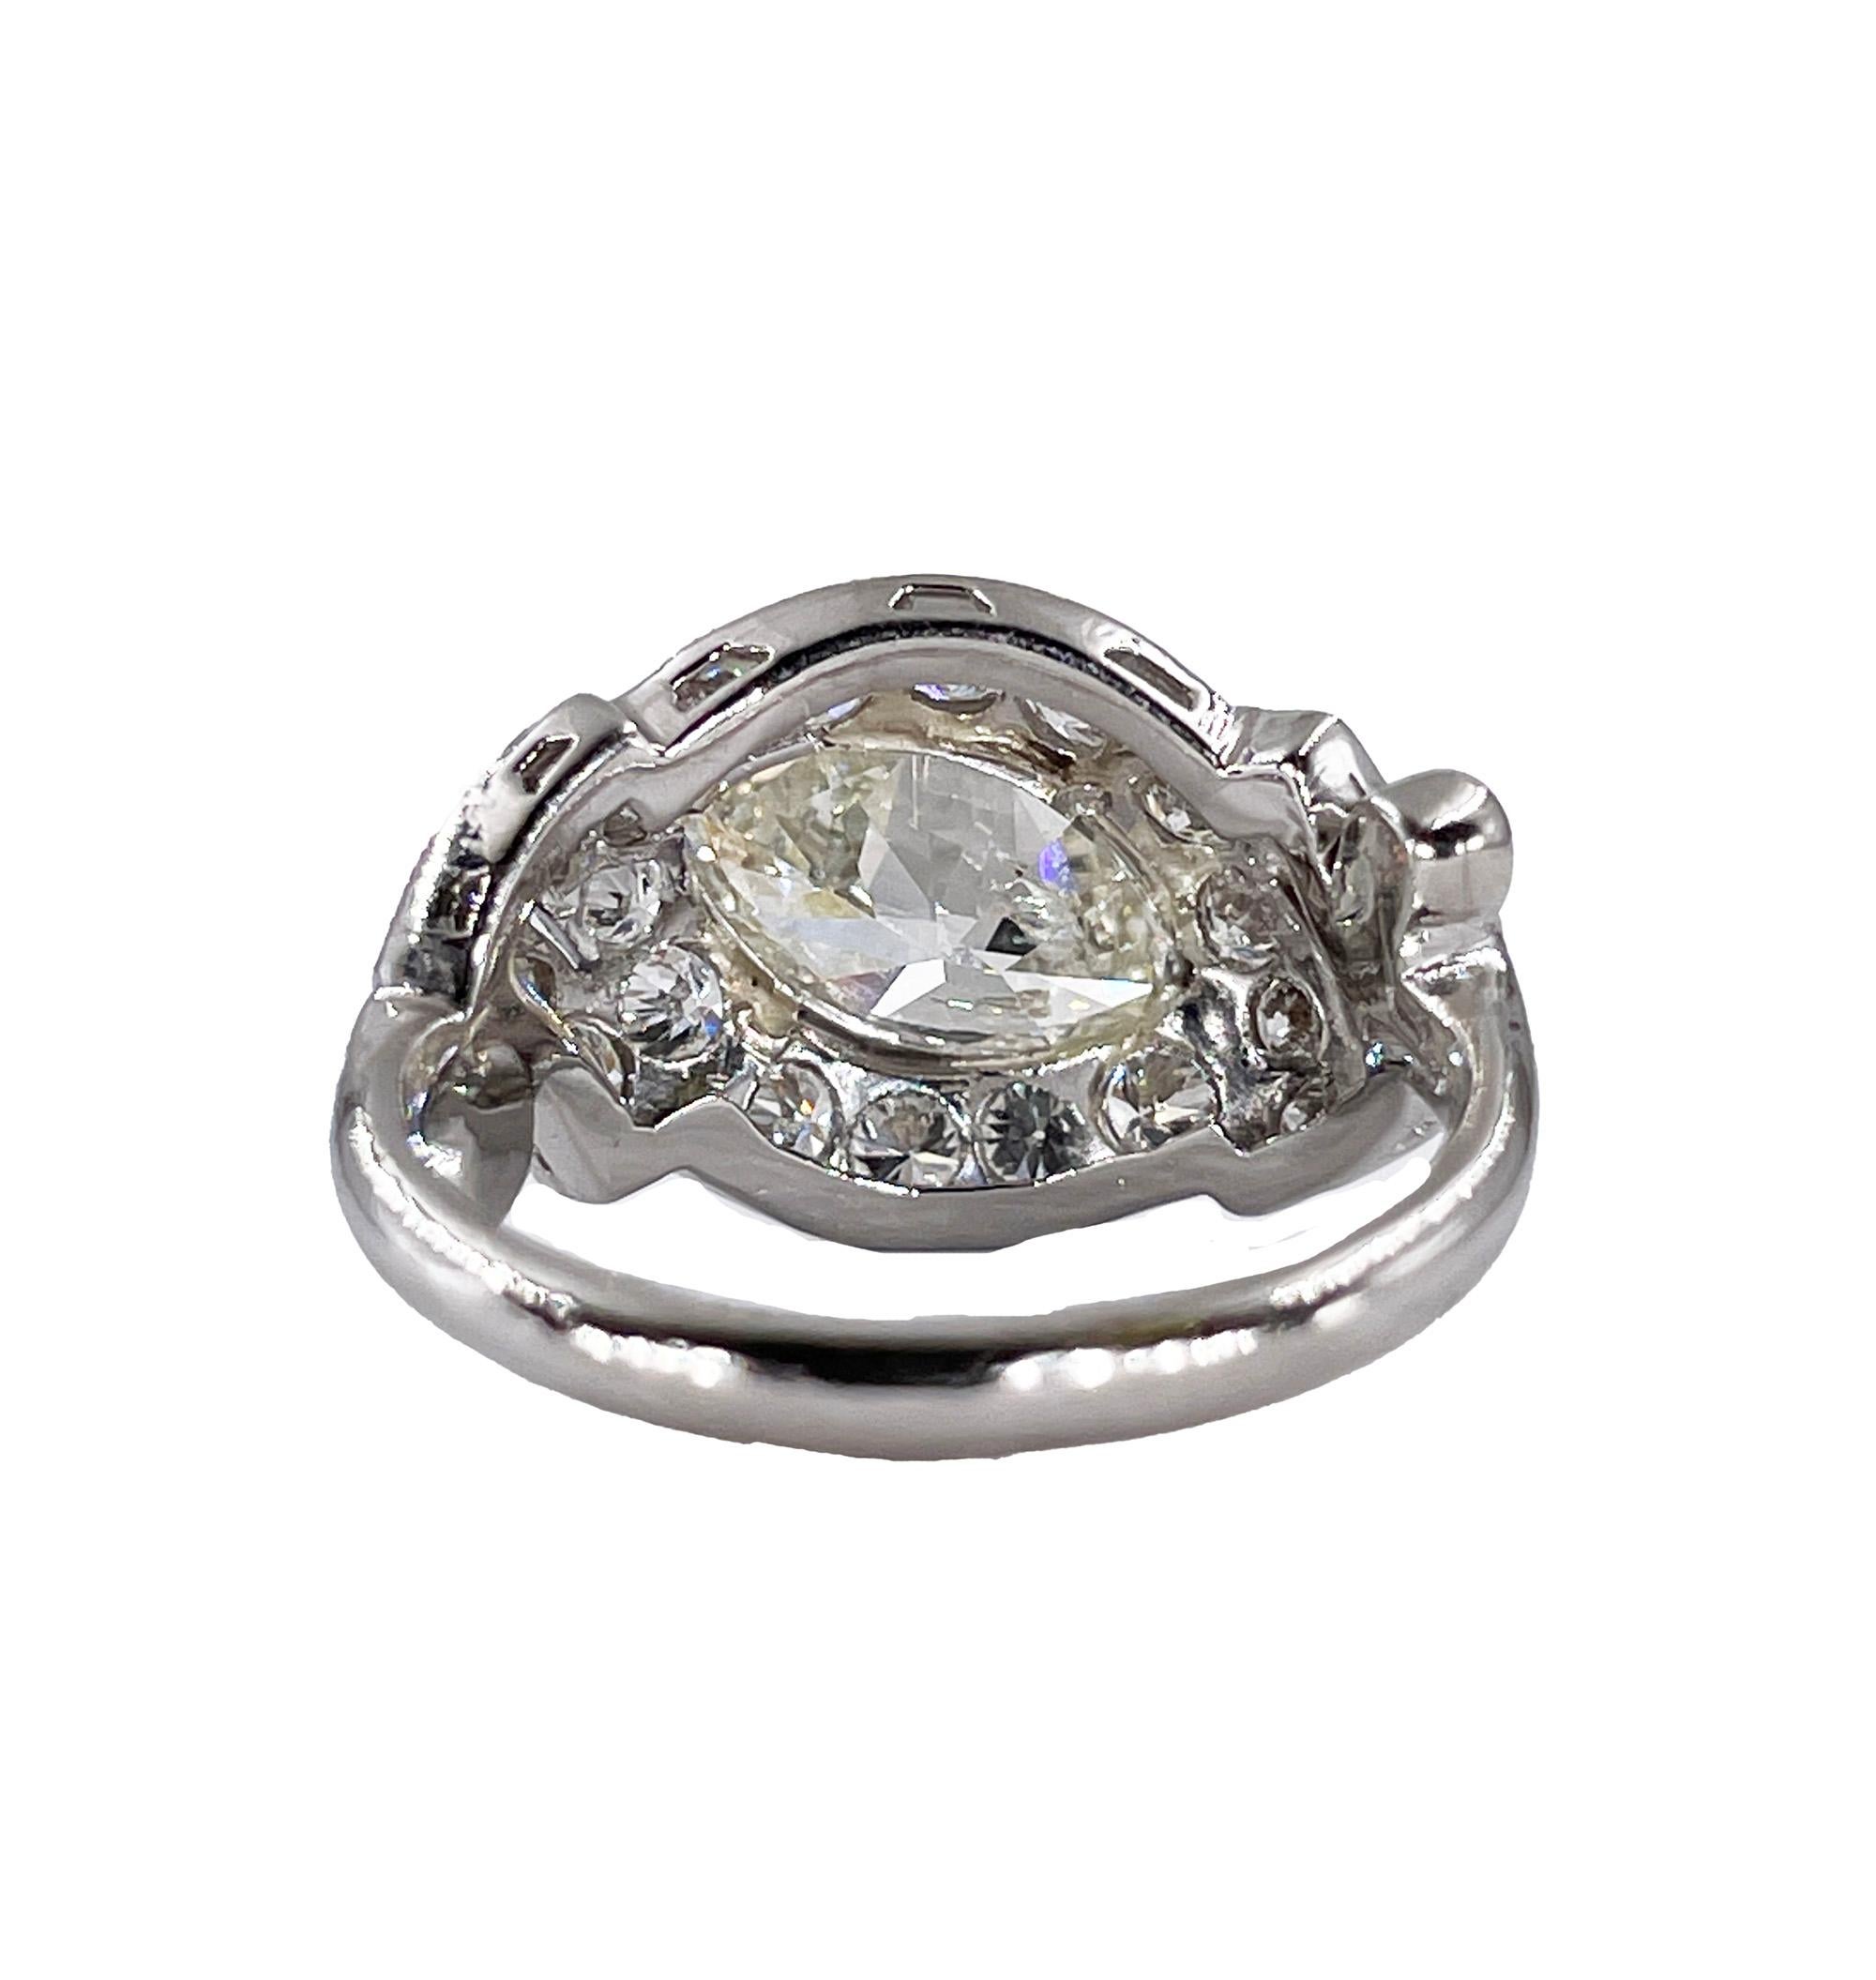 Exquisite Antique Art Deco 2.51ct Moval Marquise Cut Diamond PL Engagement Ring In Good Condition For Sale In New York, NY